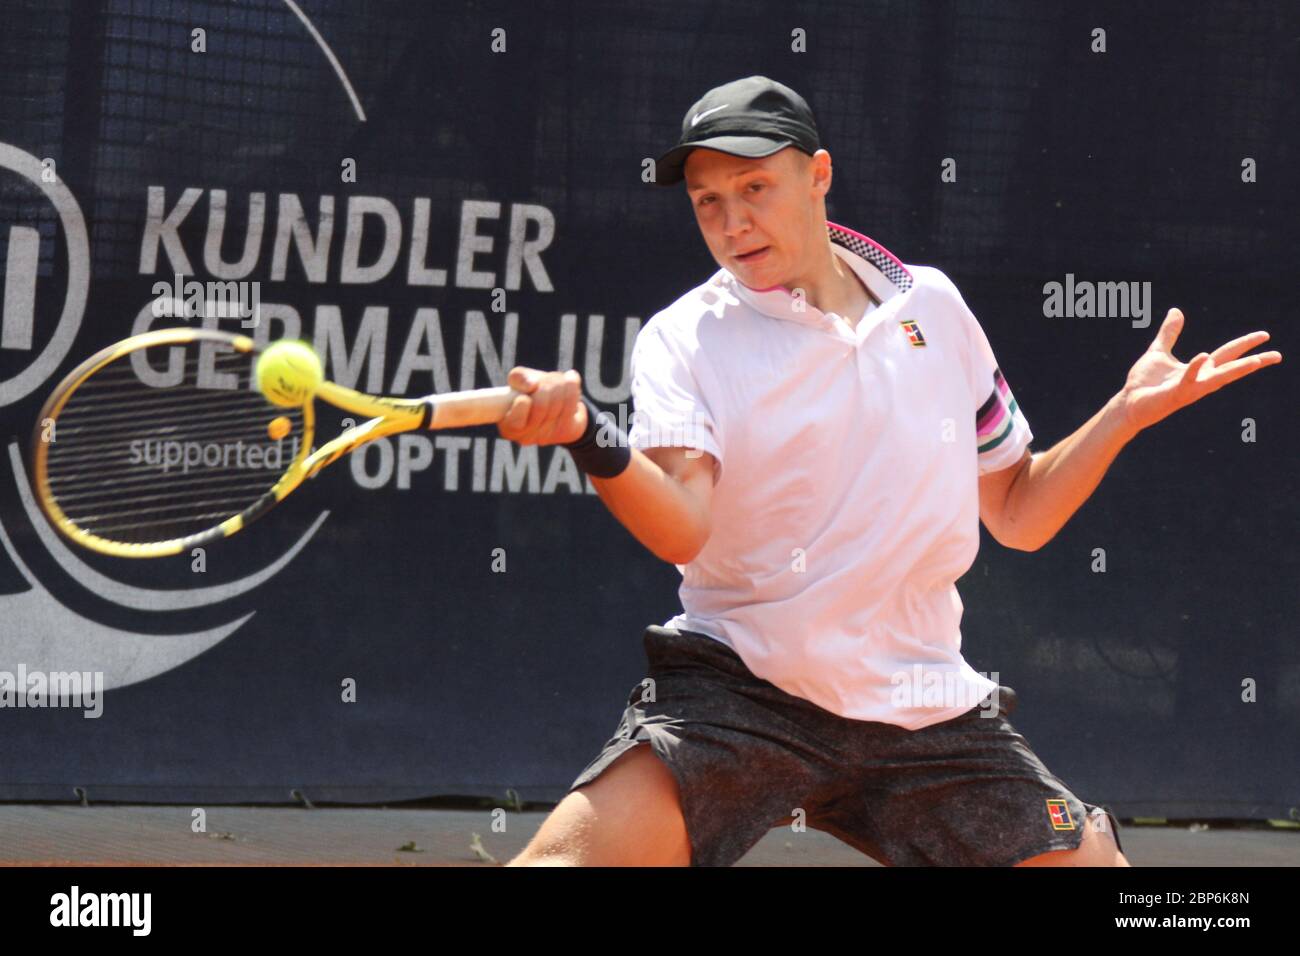 MEDJEDOVIC Hamad SRB,Allianz Kundler German Juniors supported by Optimal Systems,Berlin,Final Day,23.06.2019 Stock Photo